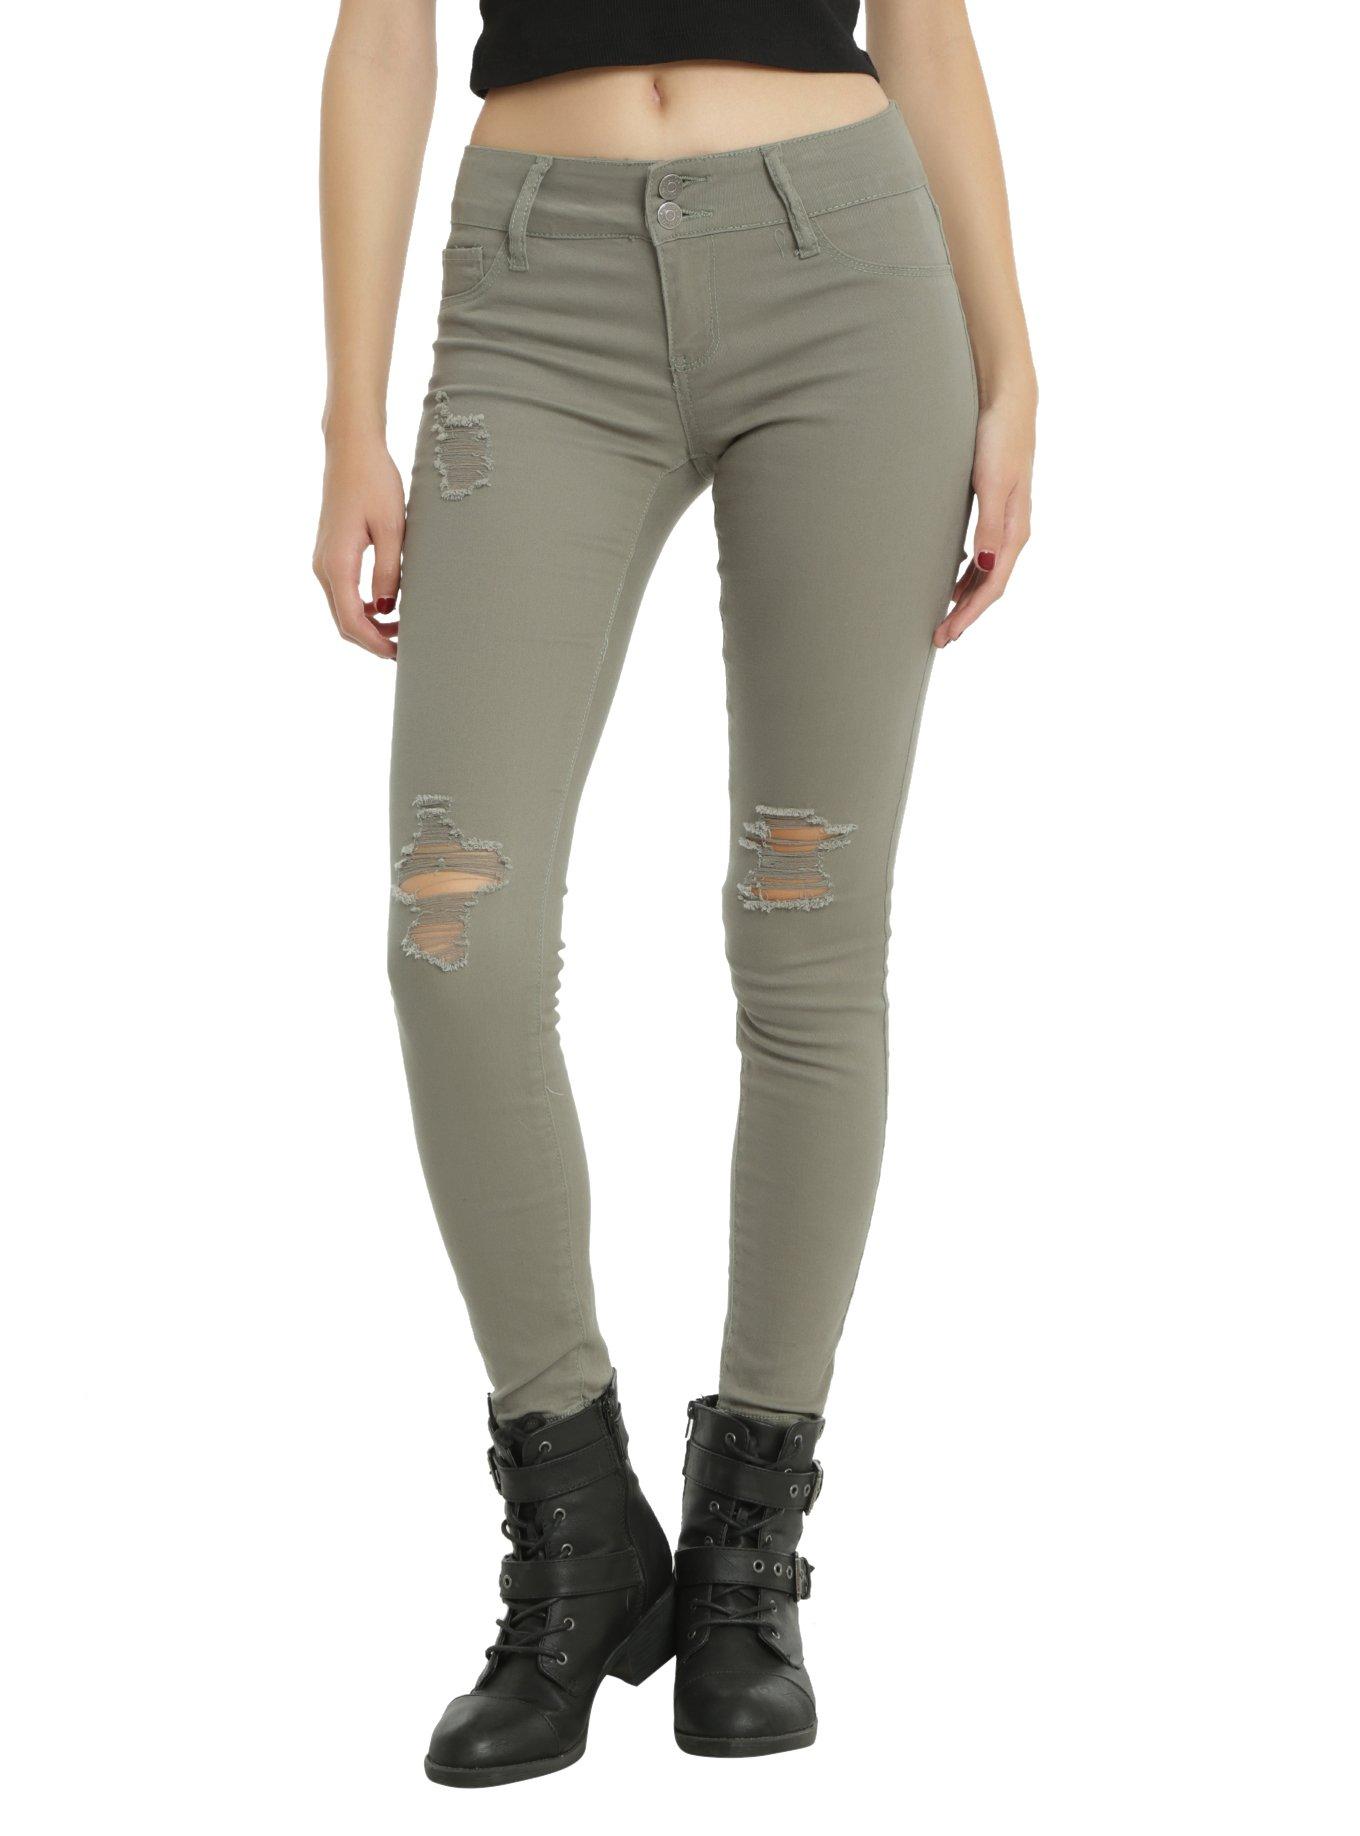 Olive Destructed Skinny Jeans | Hot Topic